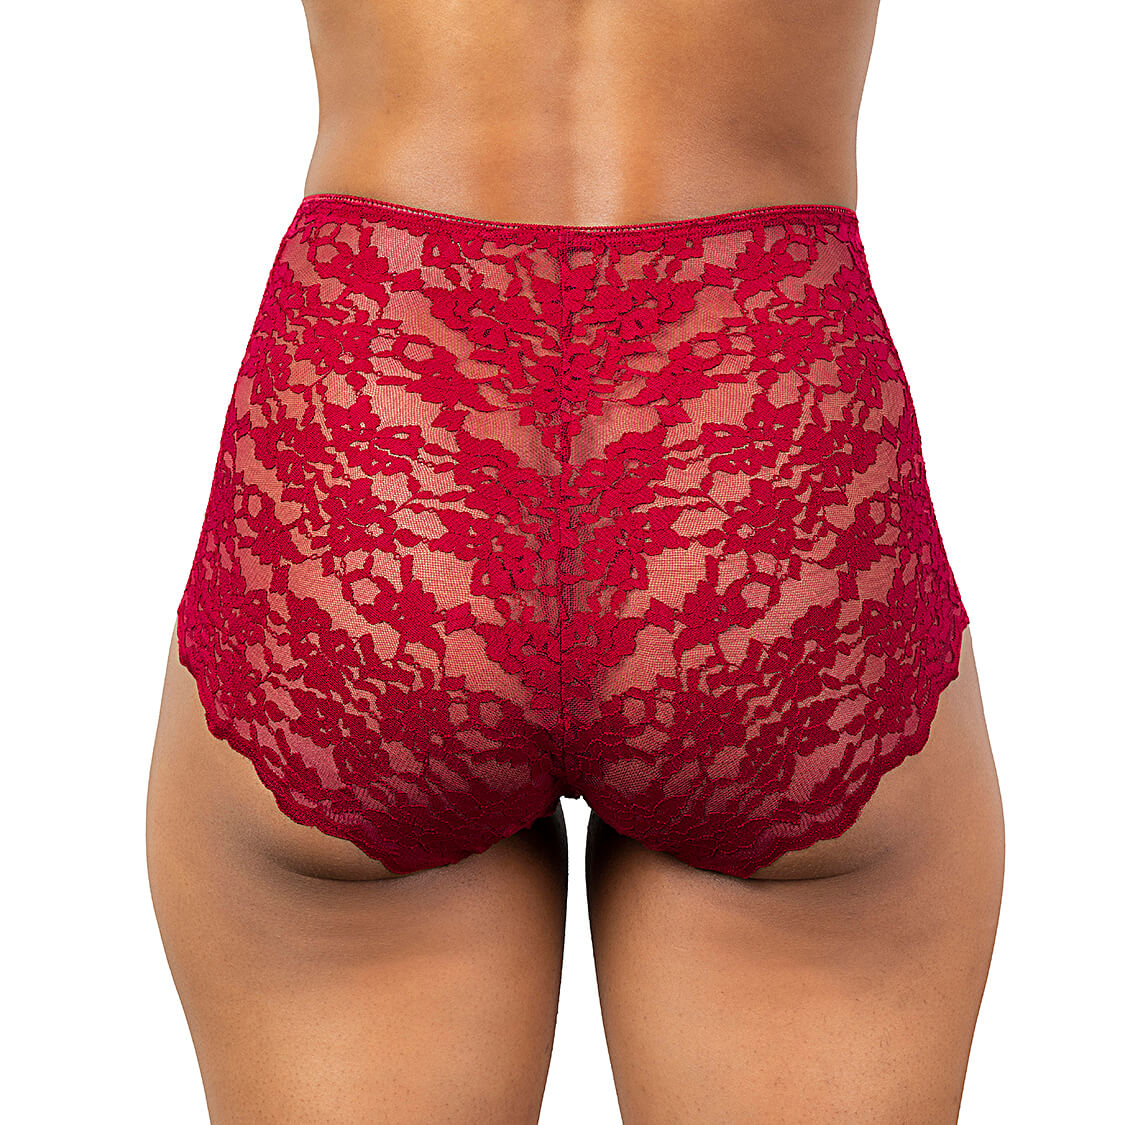 Women's Red High Waisted Panties